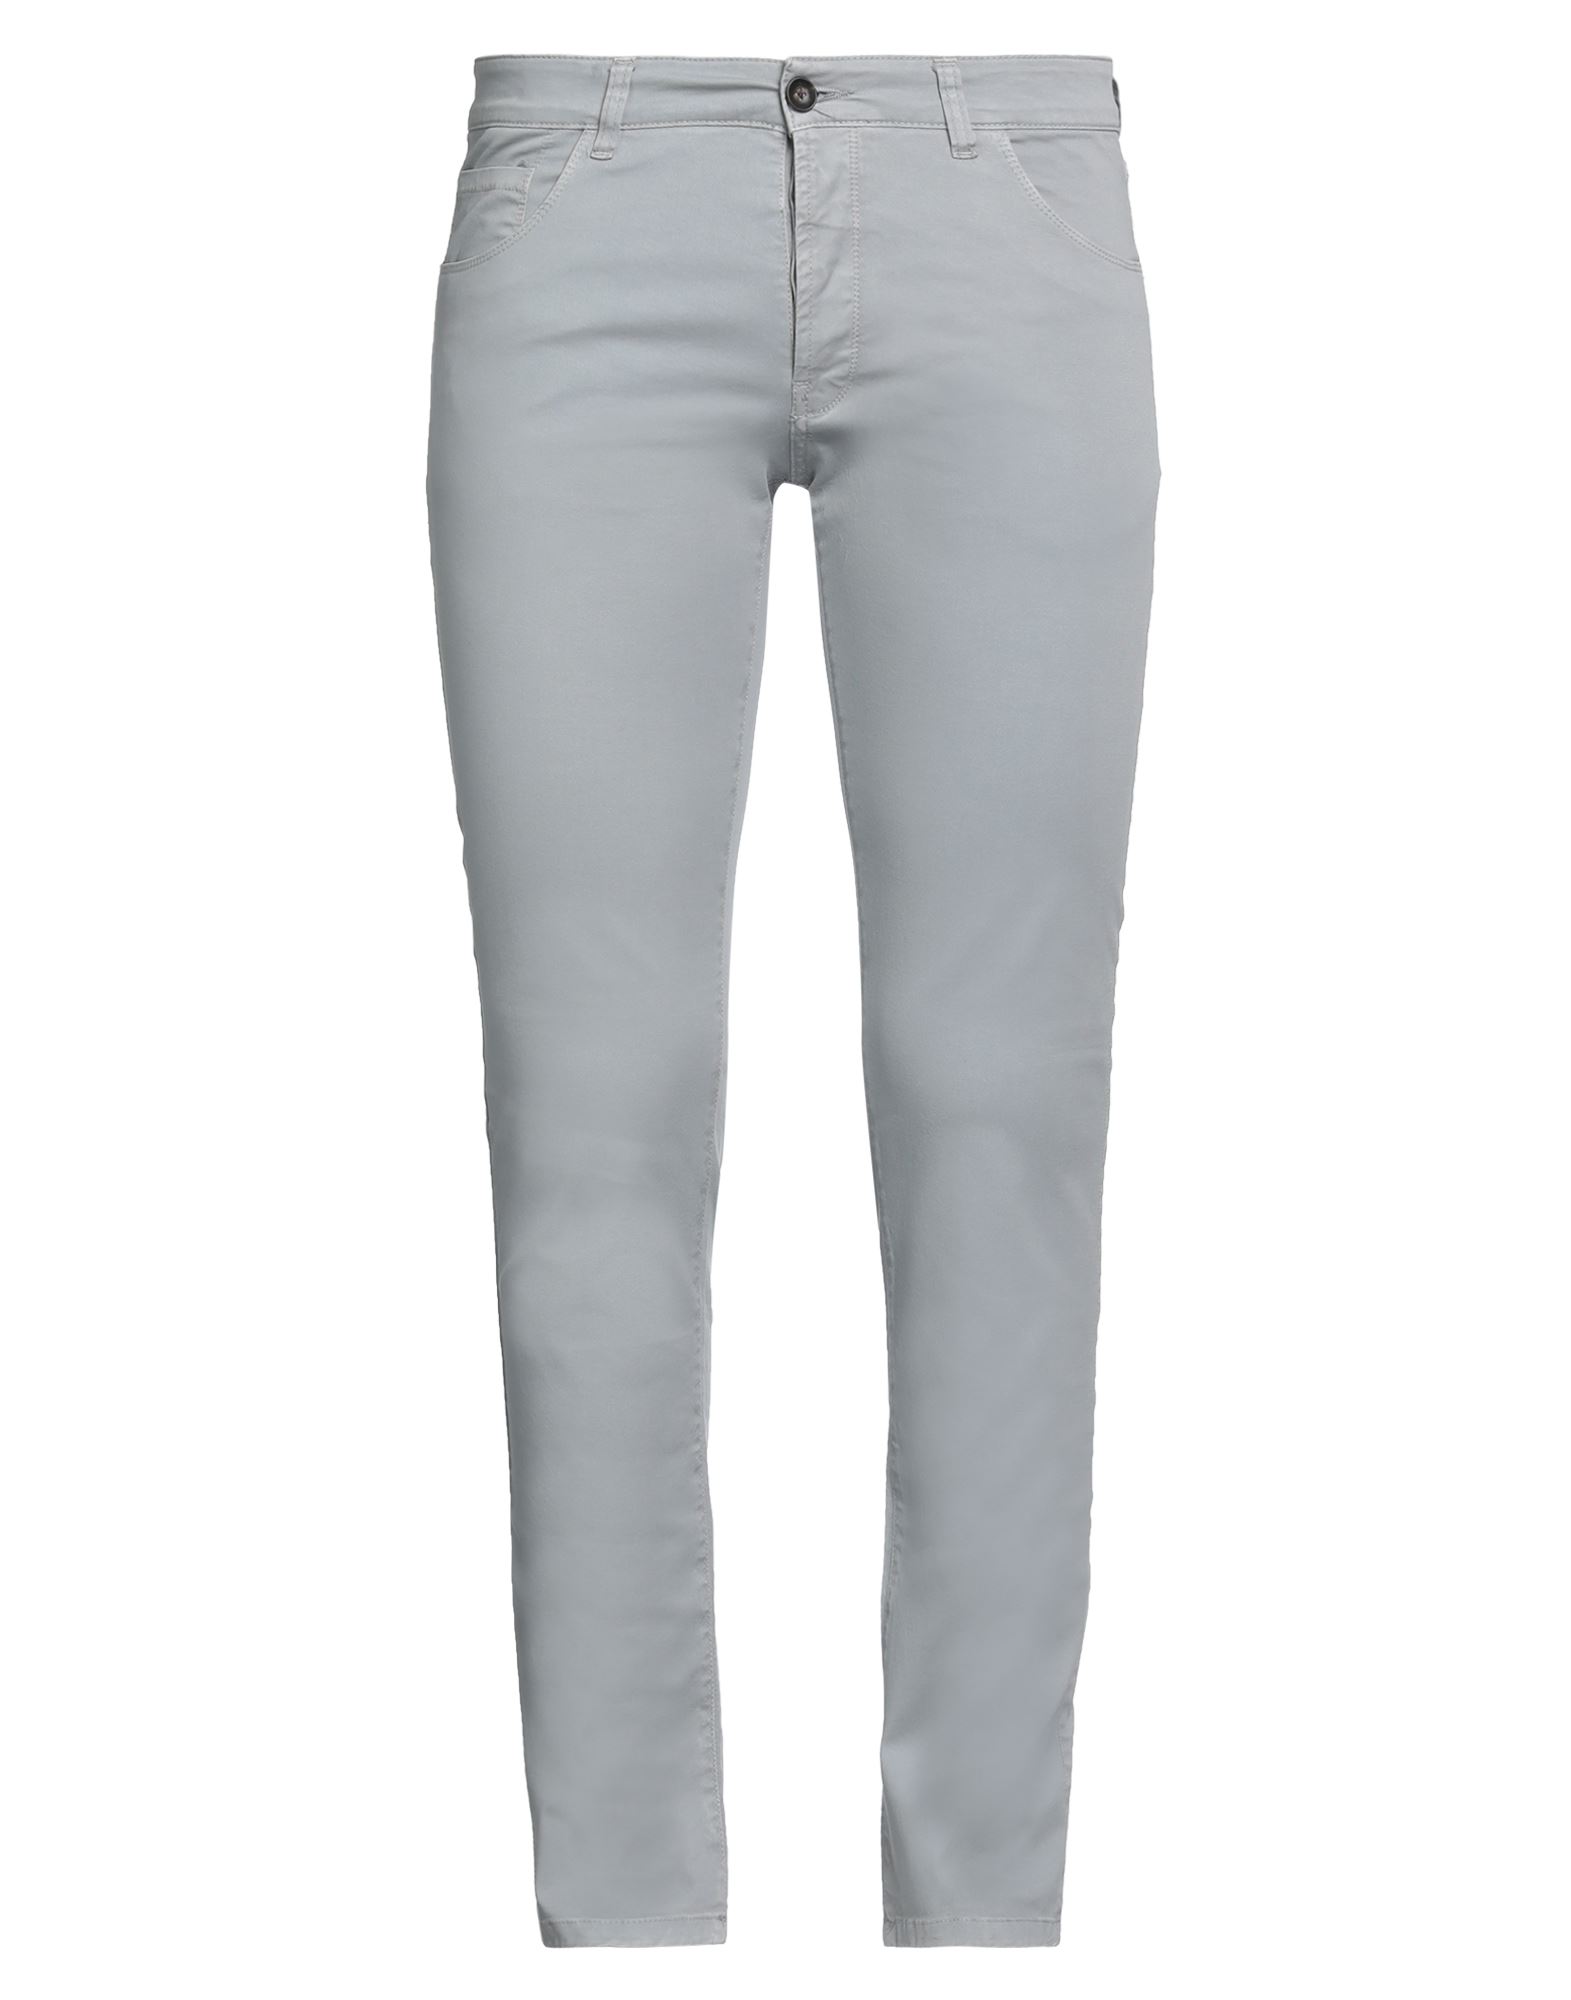 New England Pants In Grey